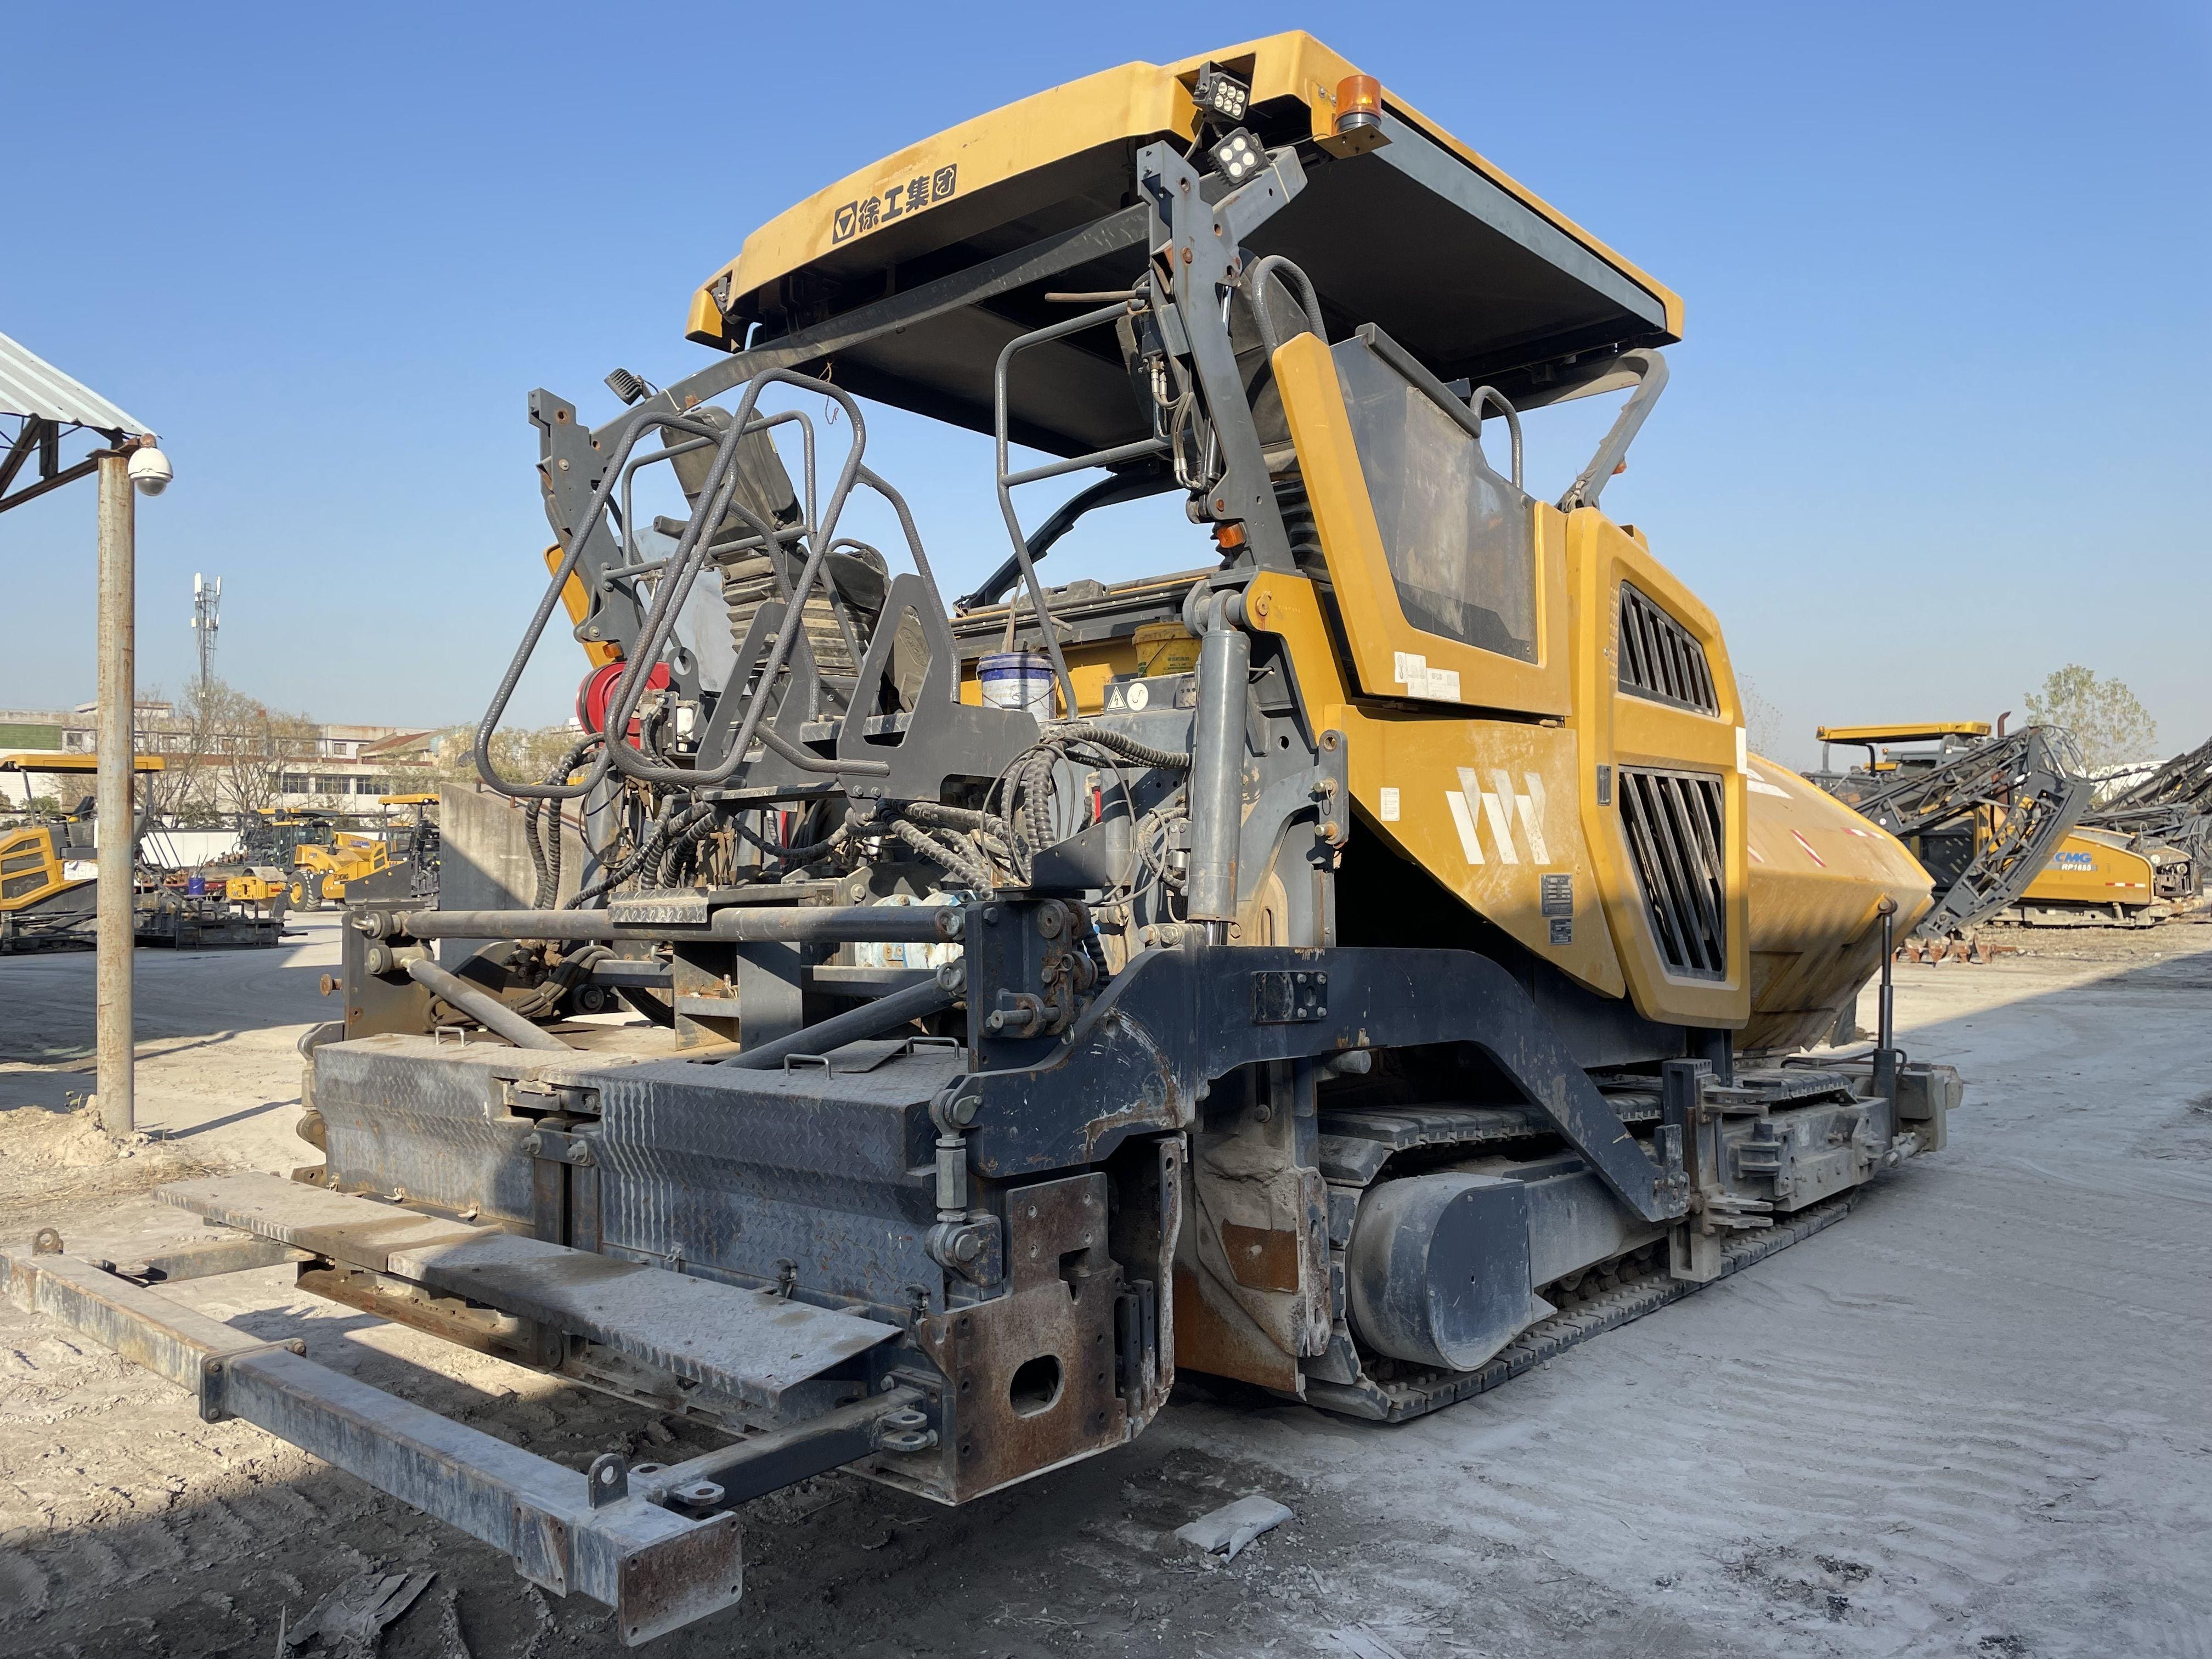 XCMG Used RP1655 paver